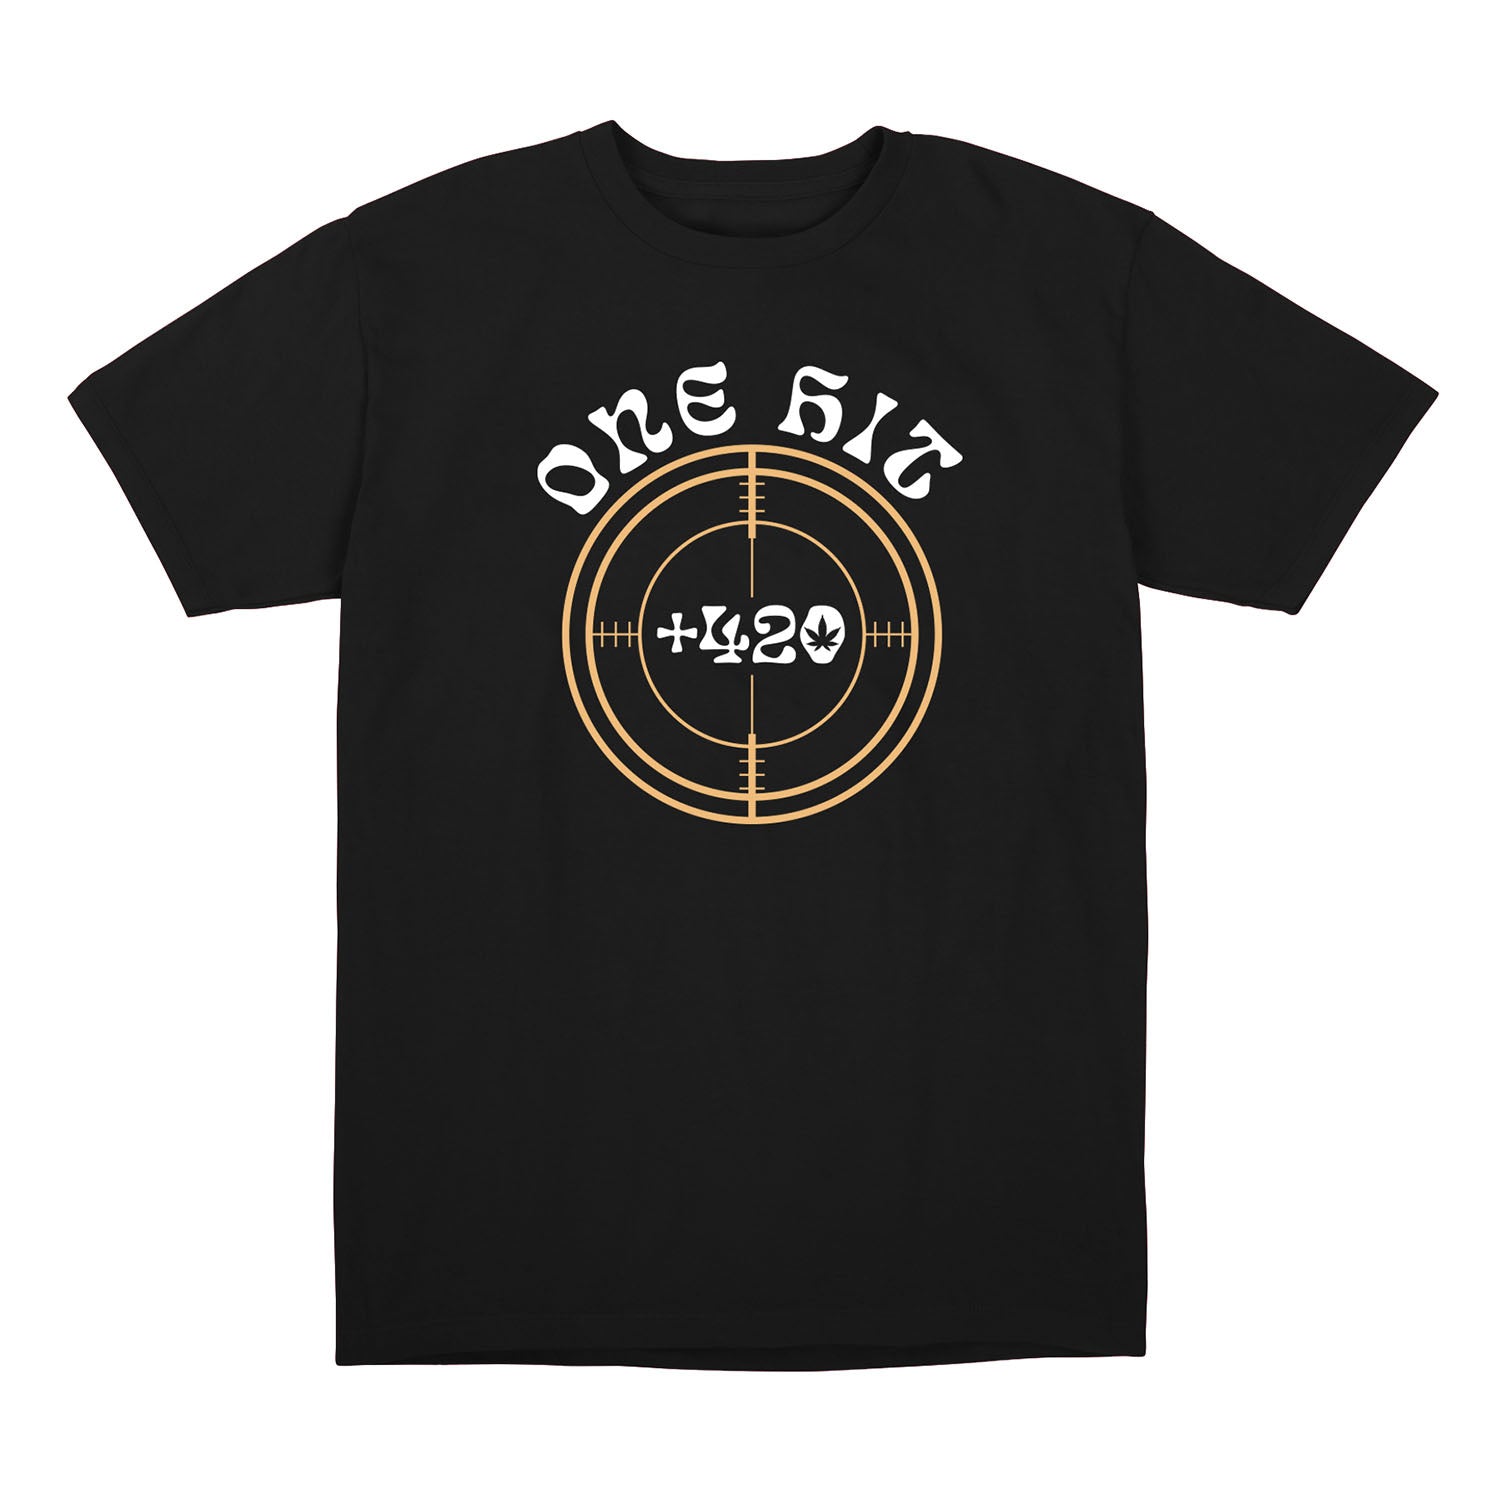 Call of Duty One Hit 420 Black T-Shirt - Front View